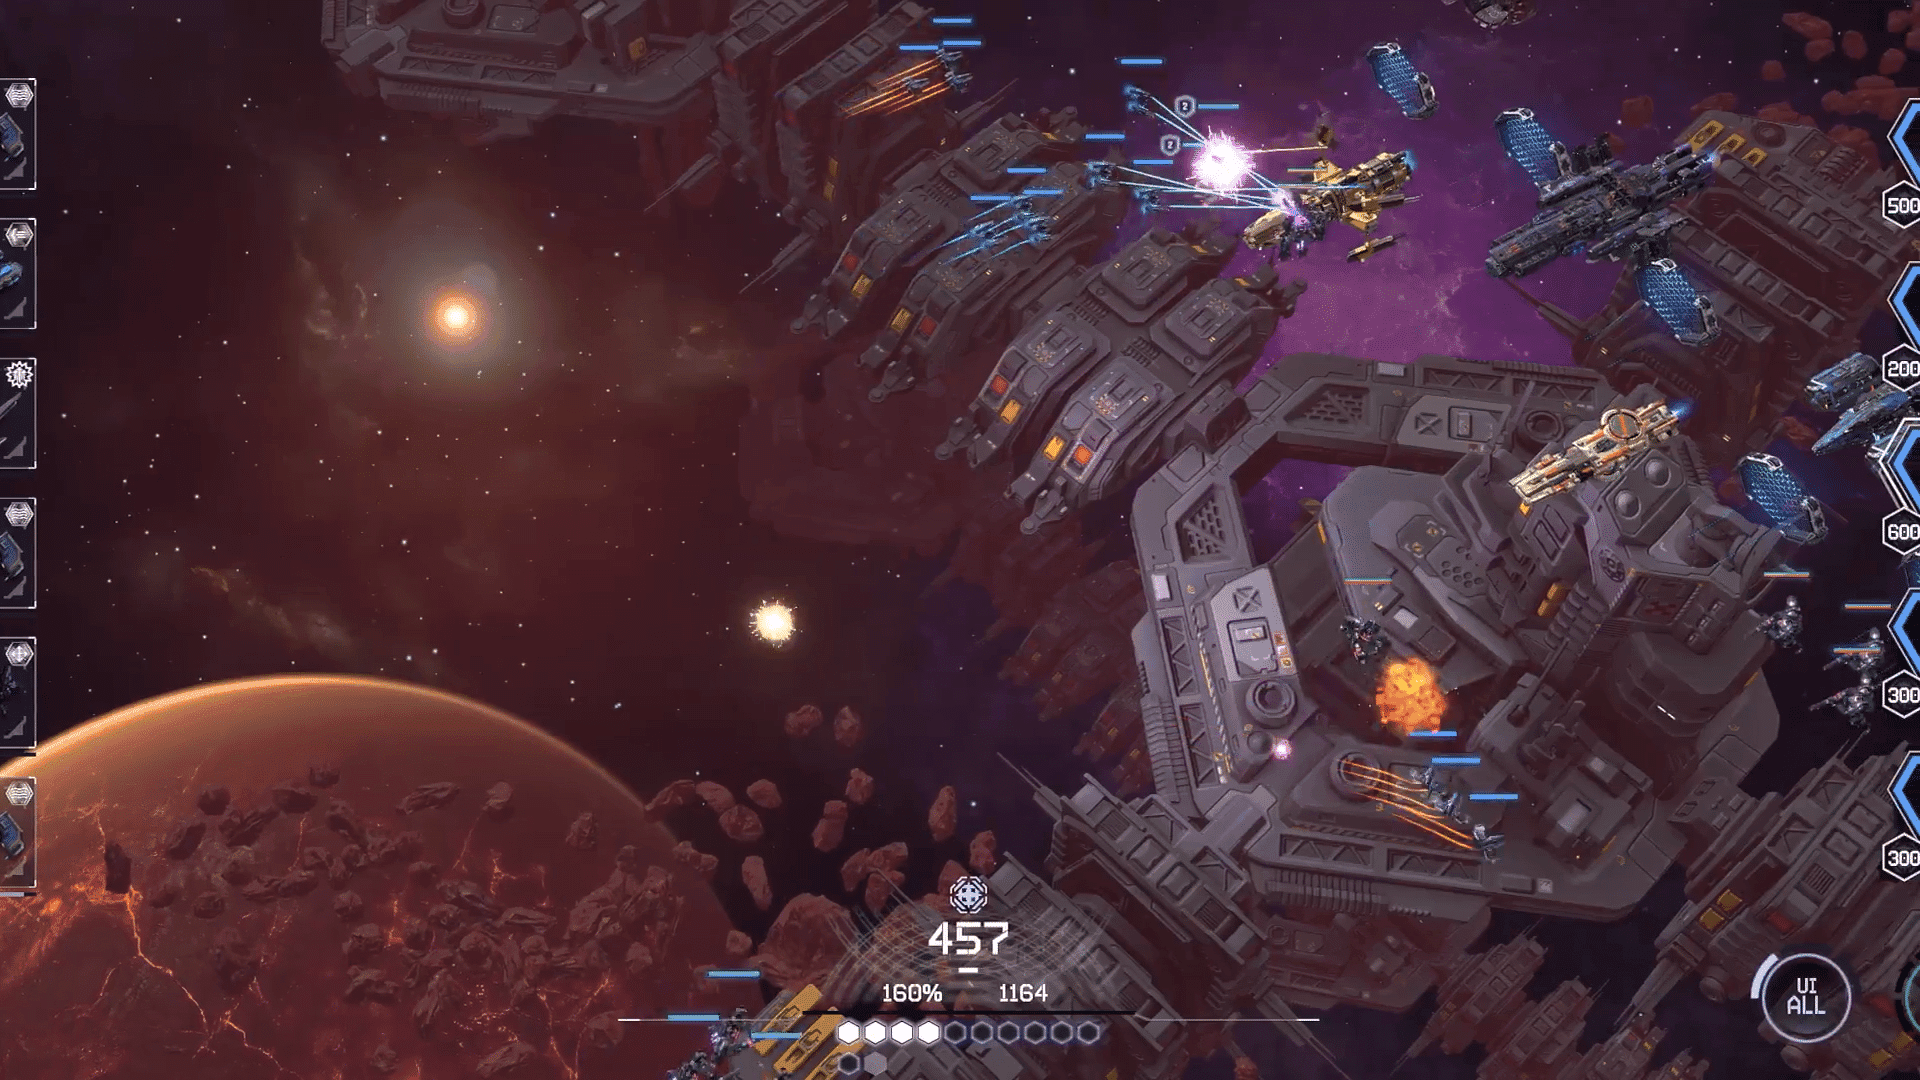 Galaxy Commanders is an immersive 3D sci-fi game. This game features competitive PvP with dynamic space battles and collaborative conquests.